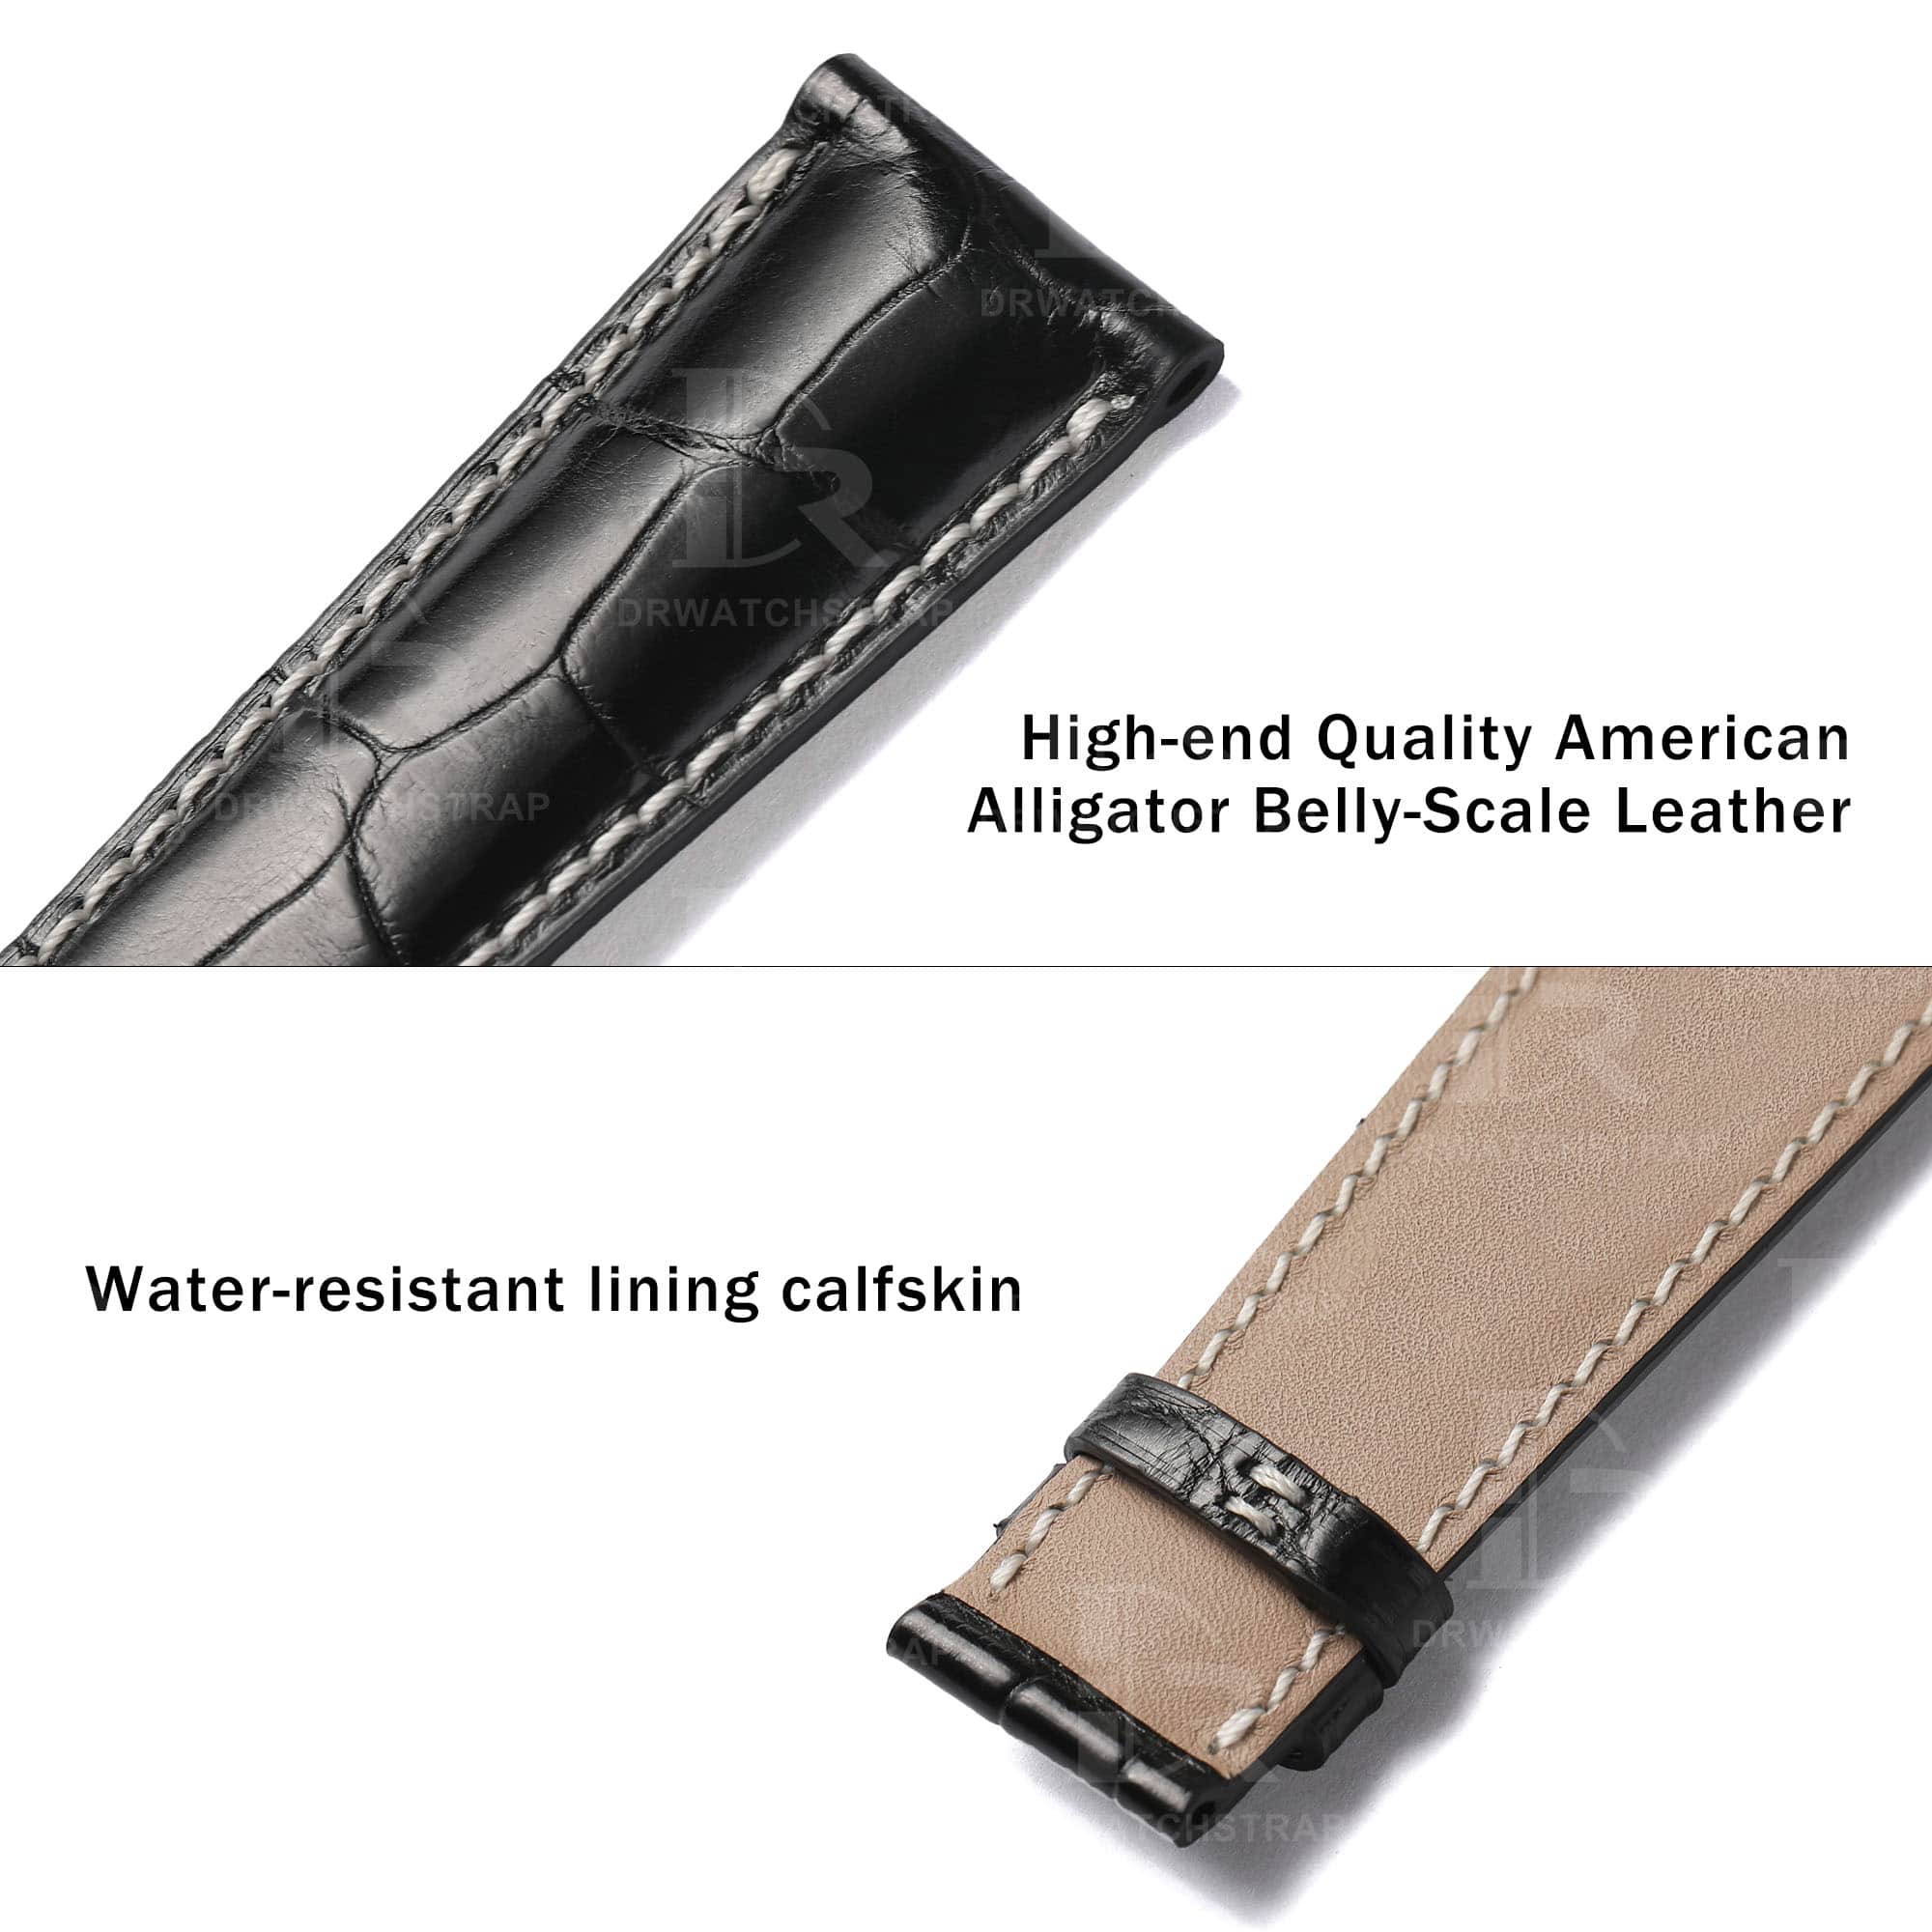 Genuine alligator material and premium calfskin leather buttom material